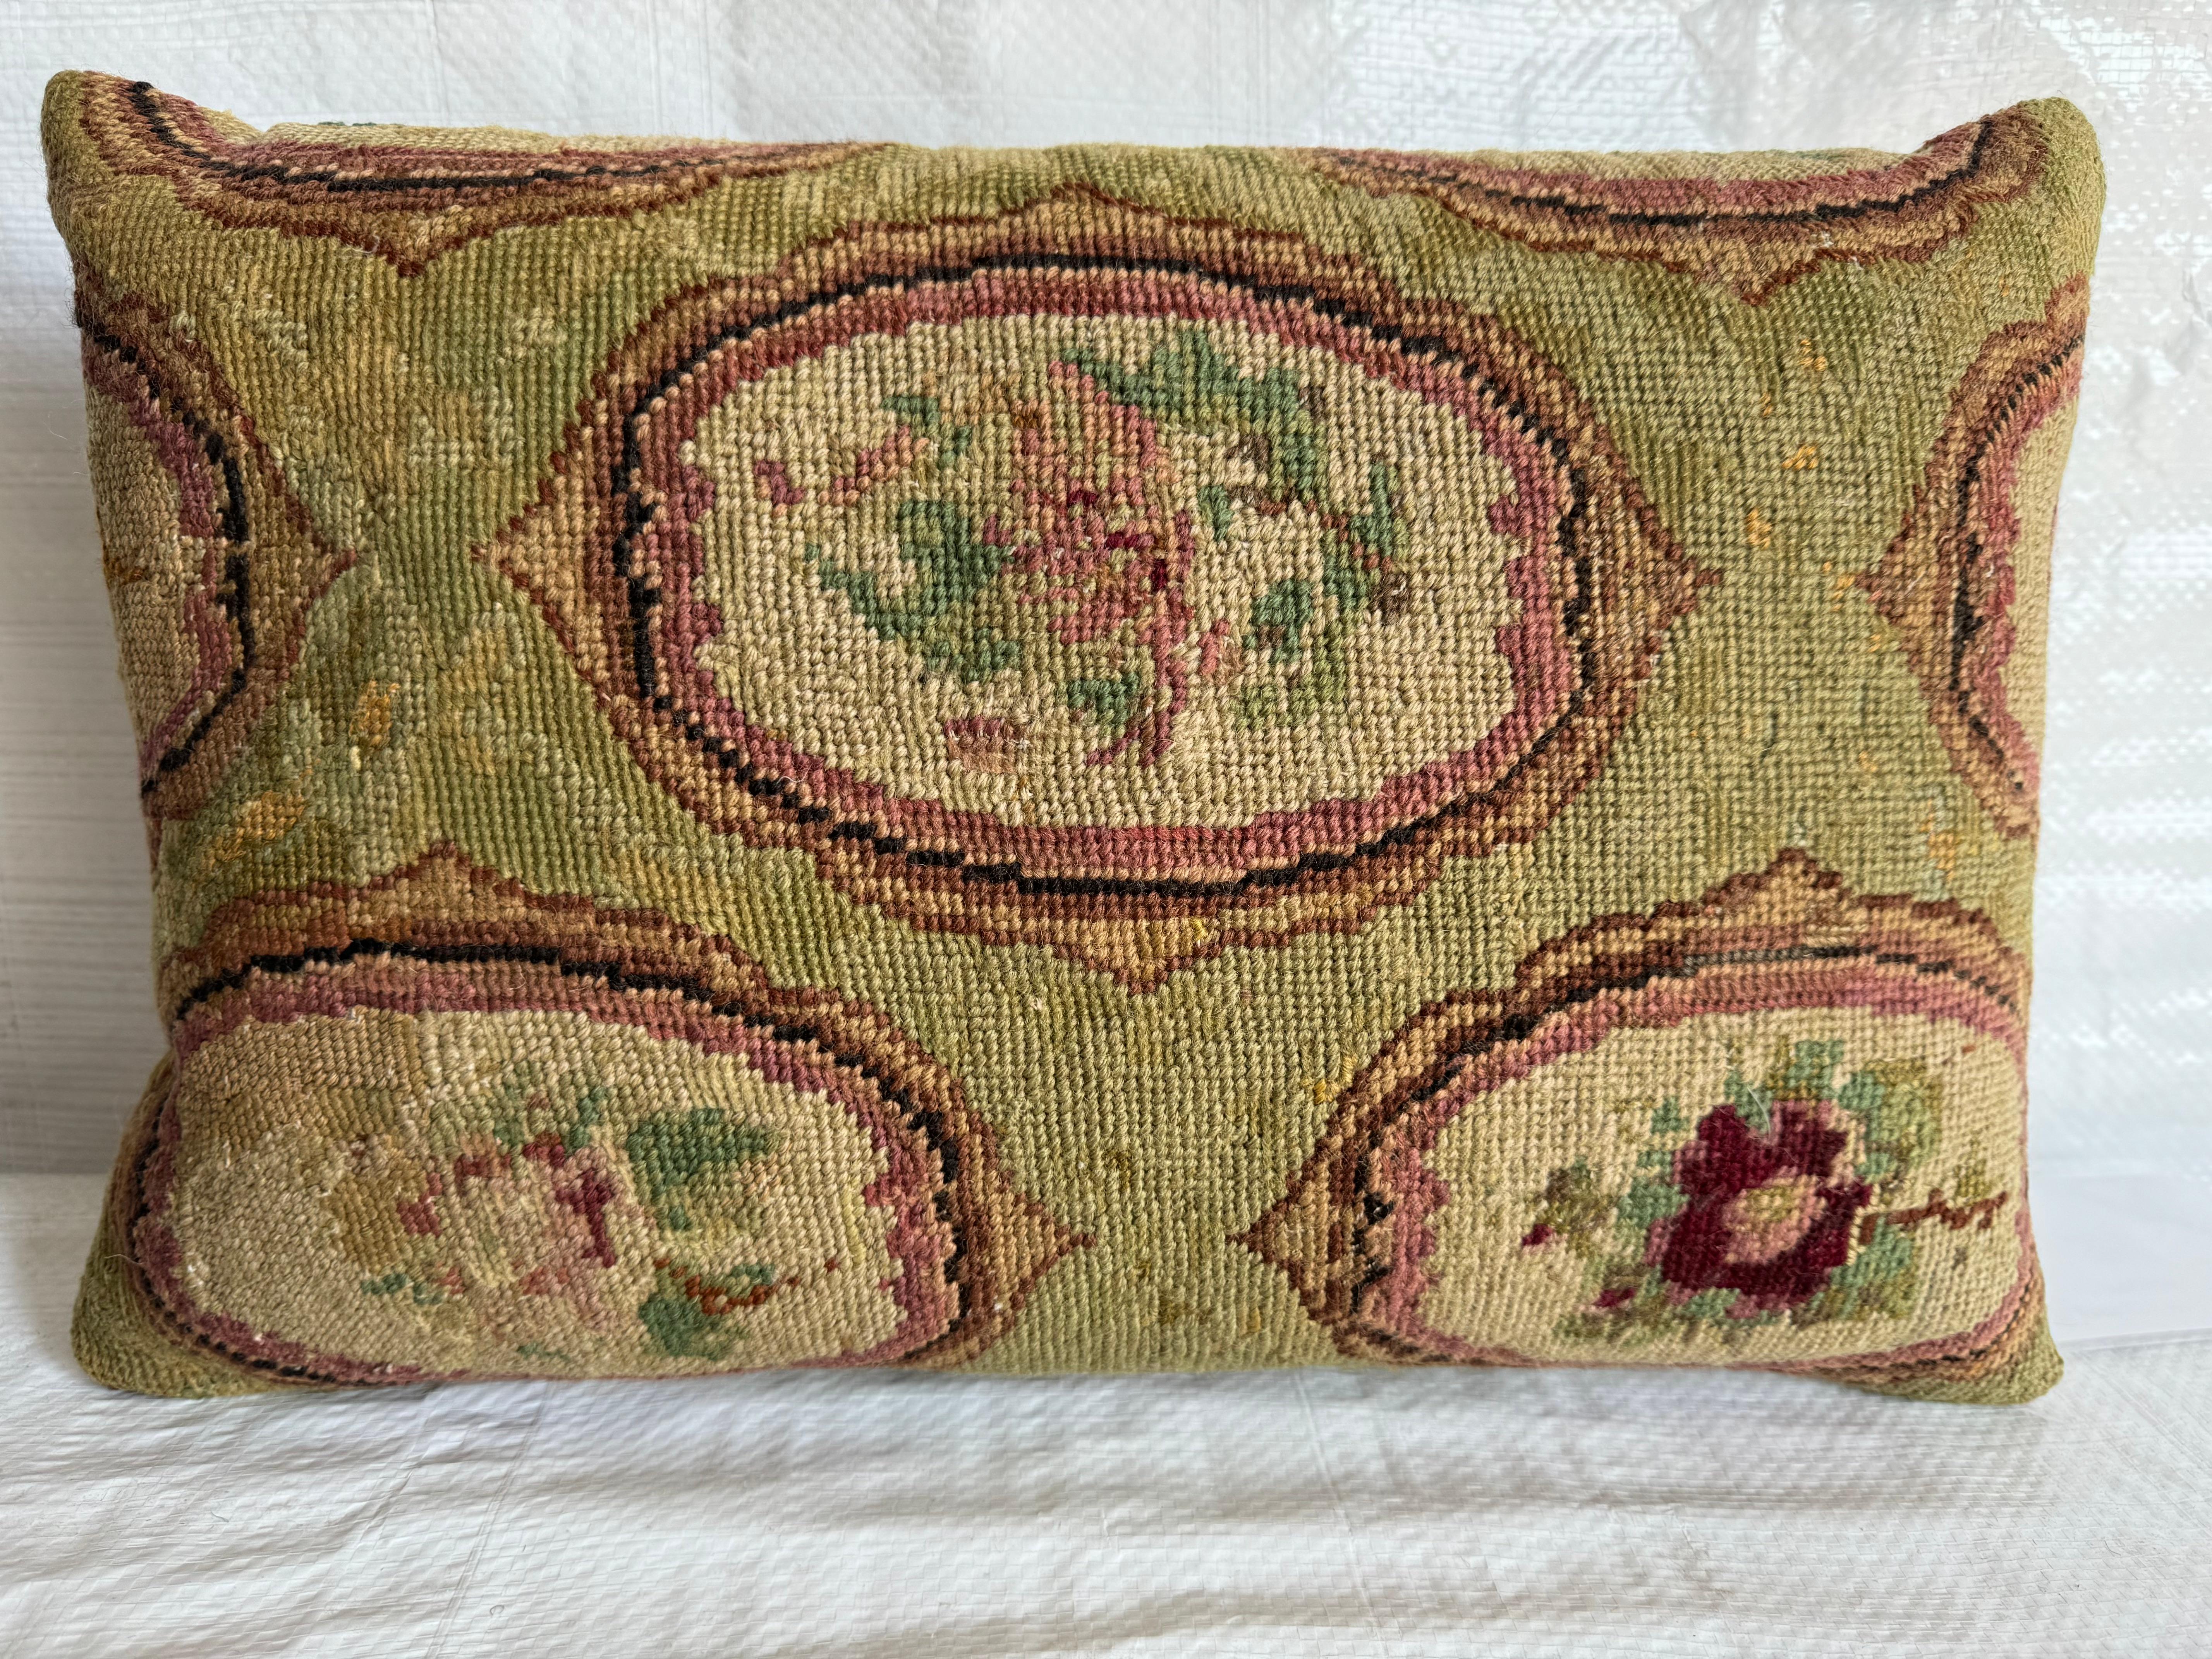 Embark on a journey through time with our exquisite 1852 English Needlework Pillow, measuring 17